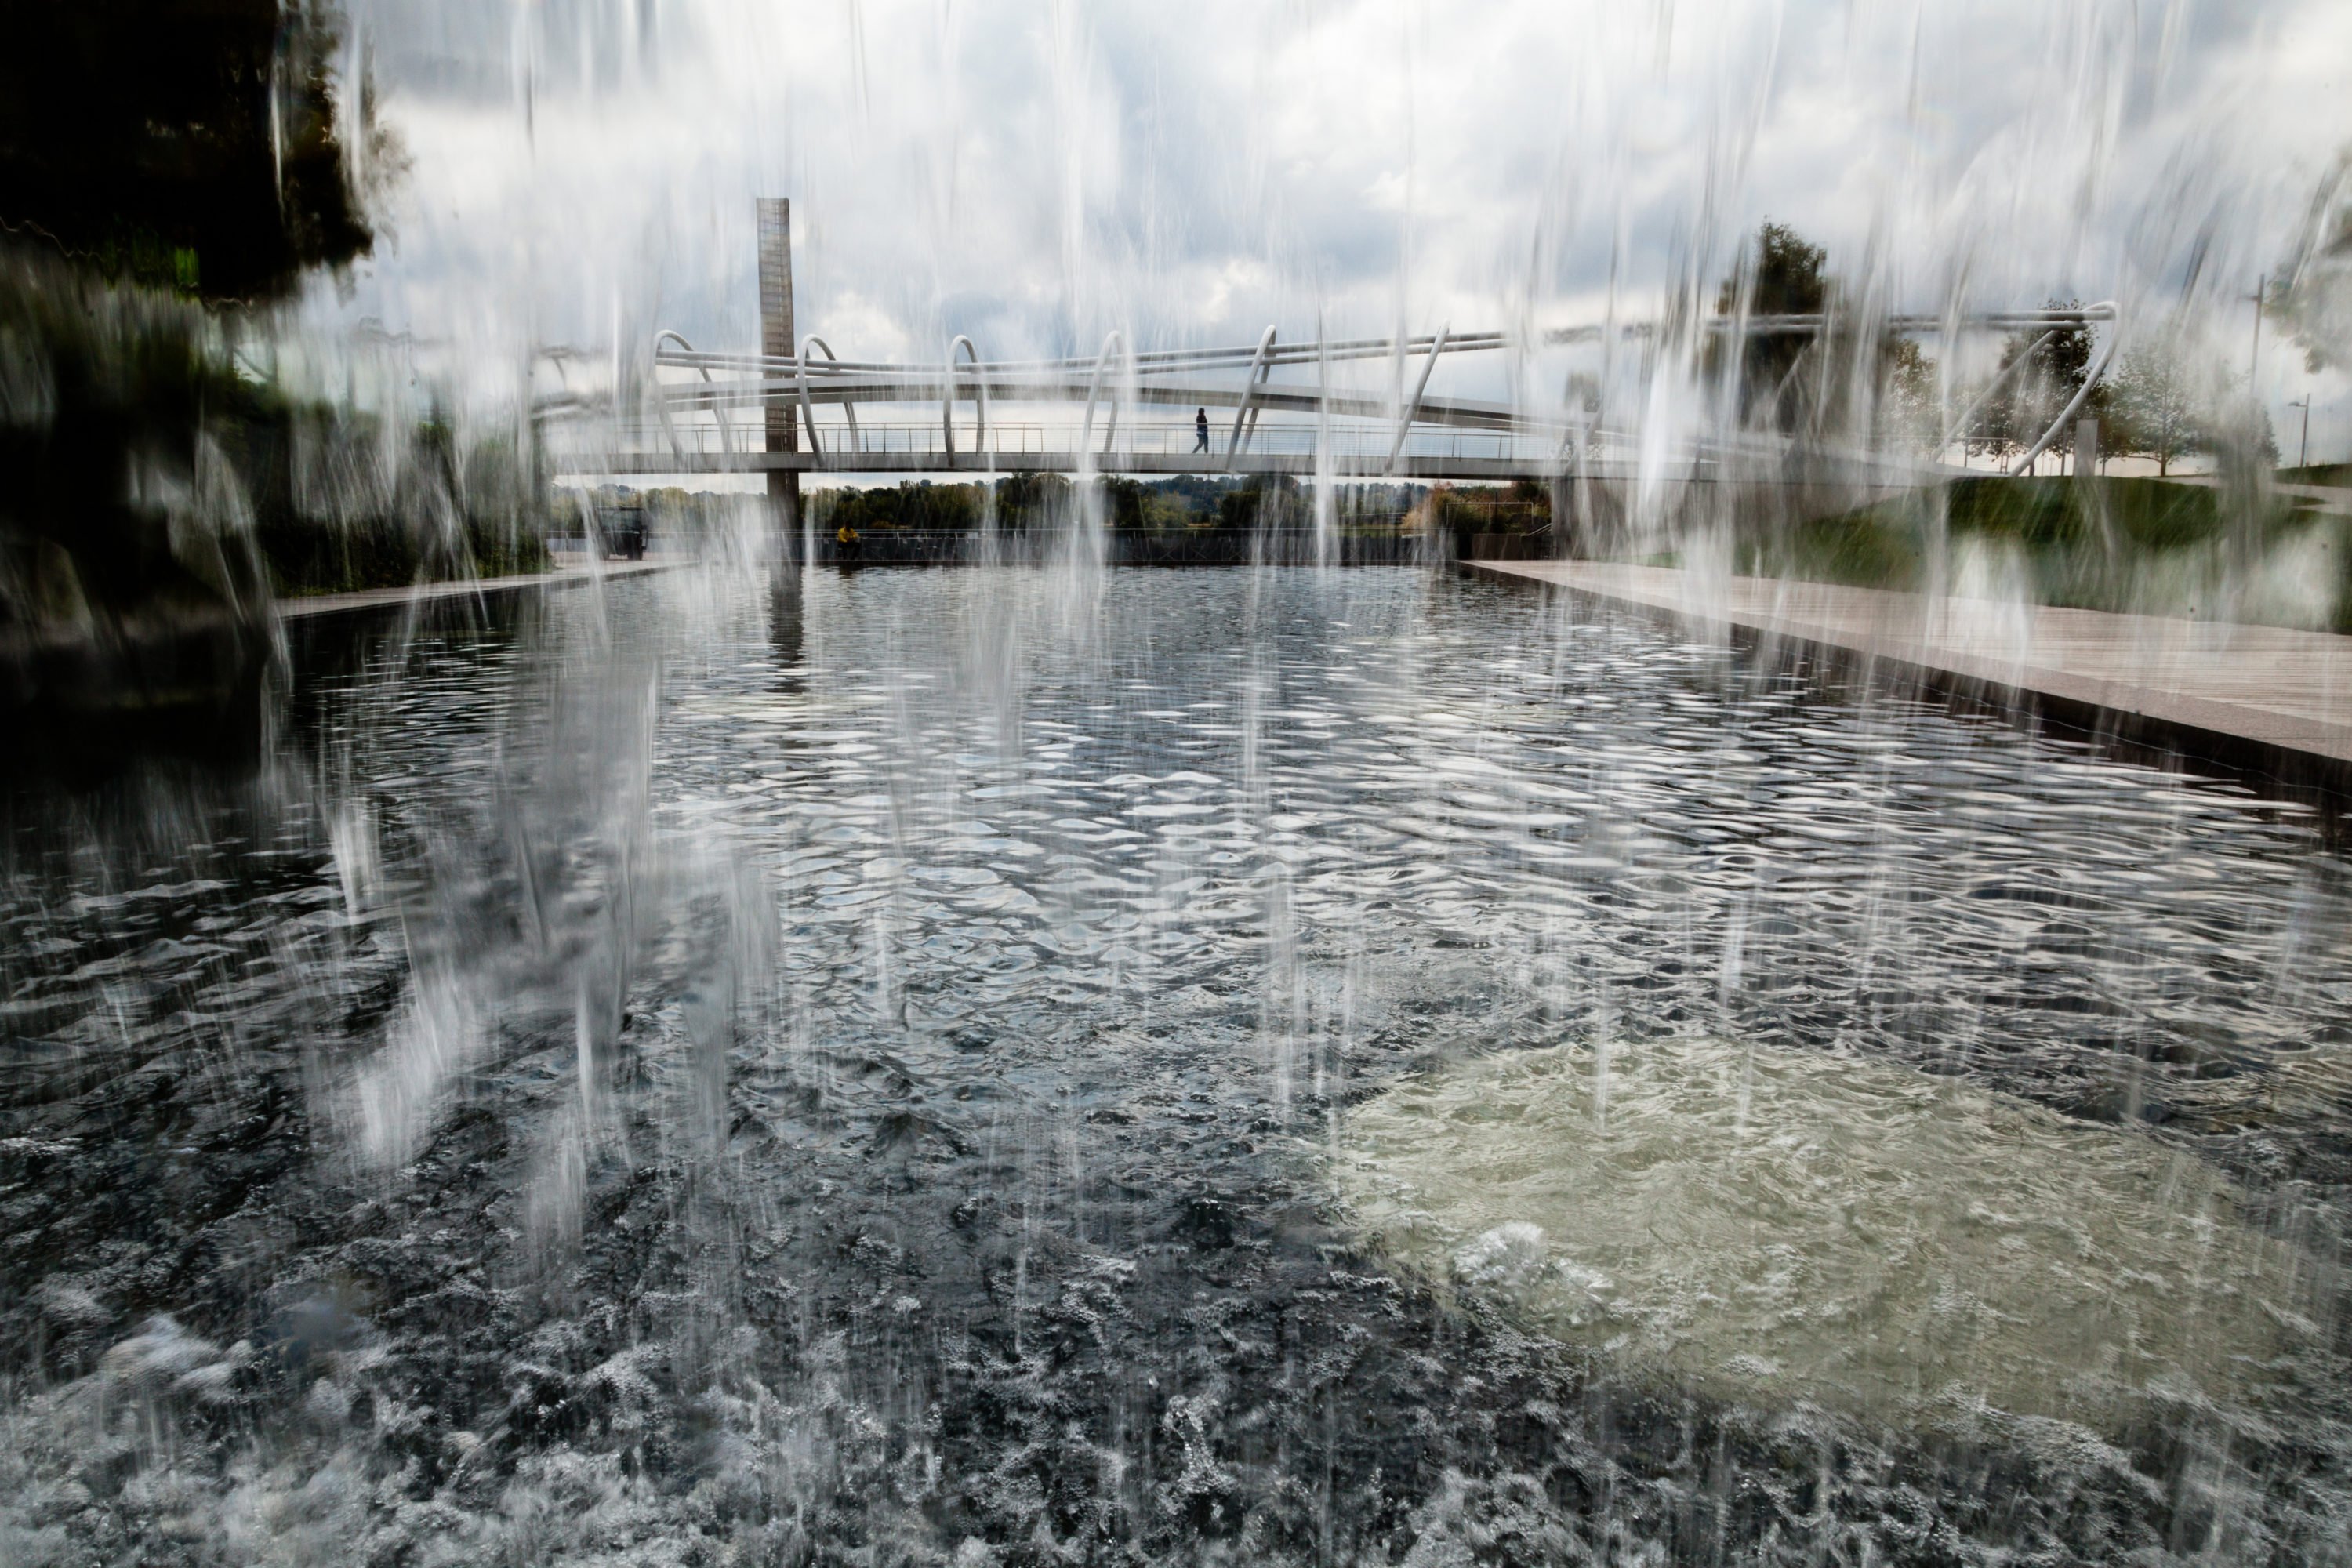 Water falls from an installation at Yards Park in Washington, D.C., on Oct. 1, 2014. The park is part of the 9-mile Anacostia Water Trail, which features natural areas as well as riverfront recreation and ends where the Anacostia meets the Potomac River.